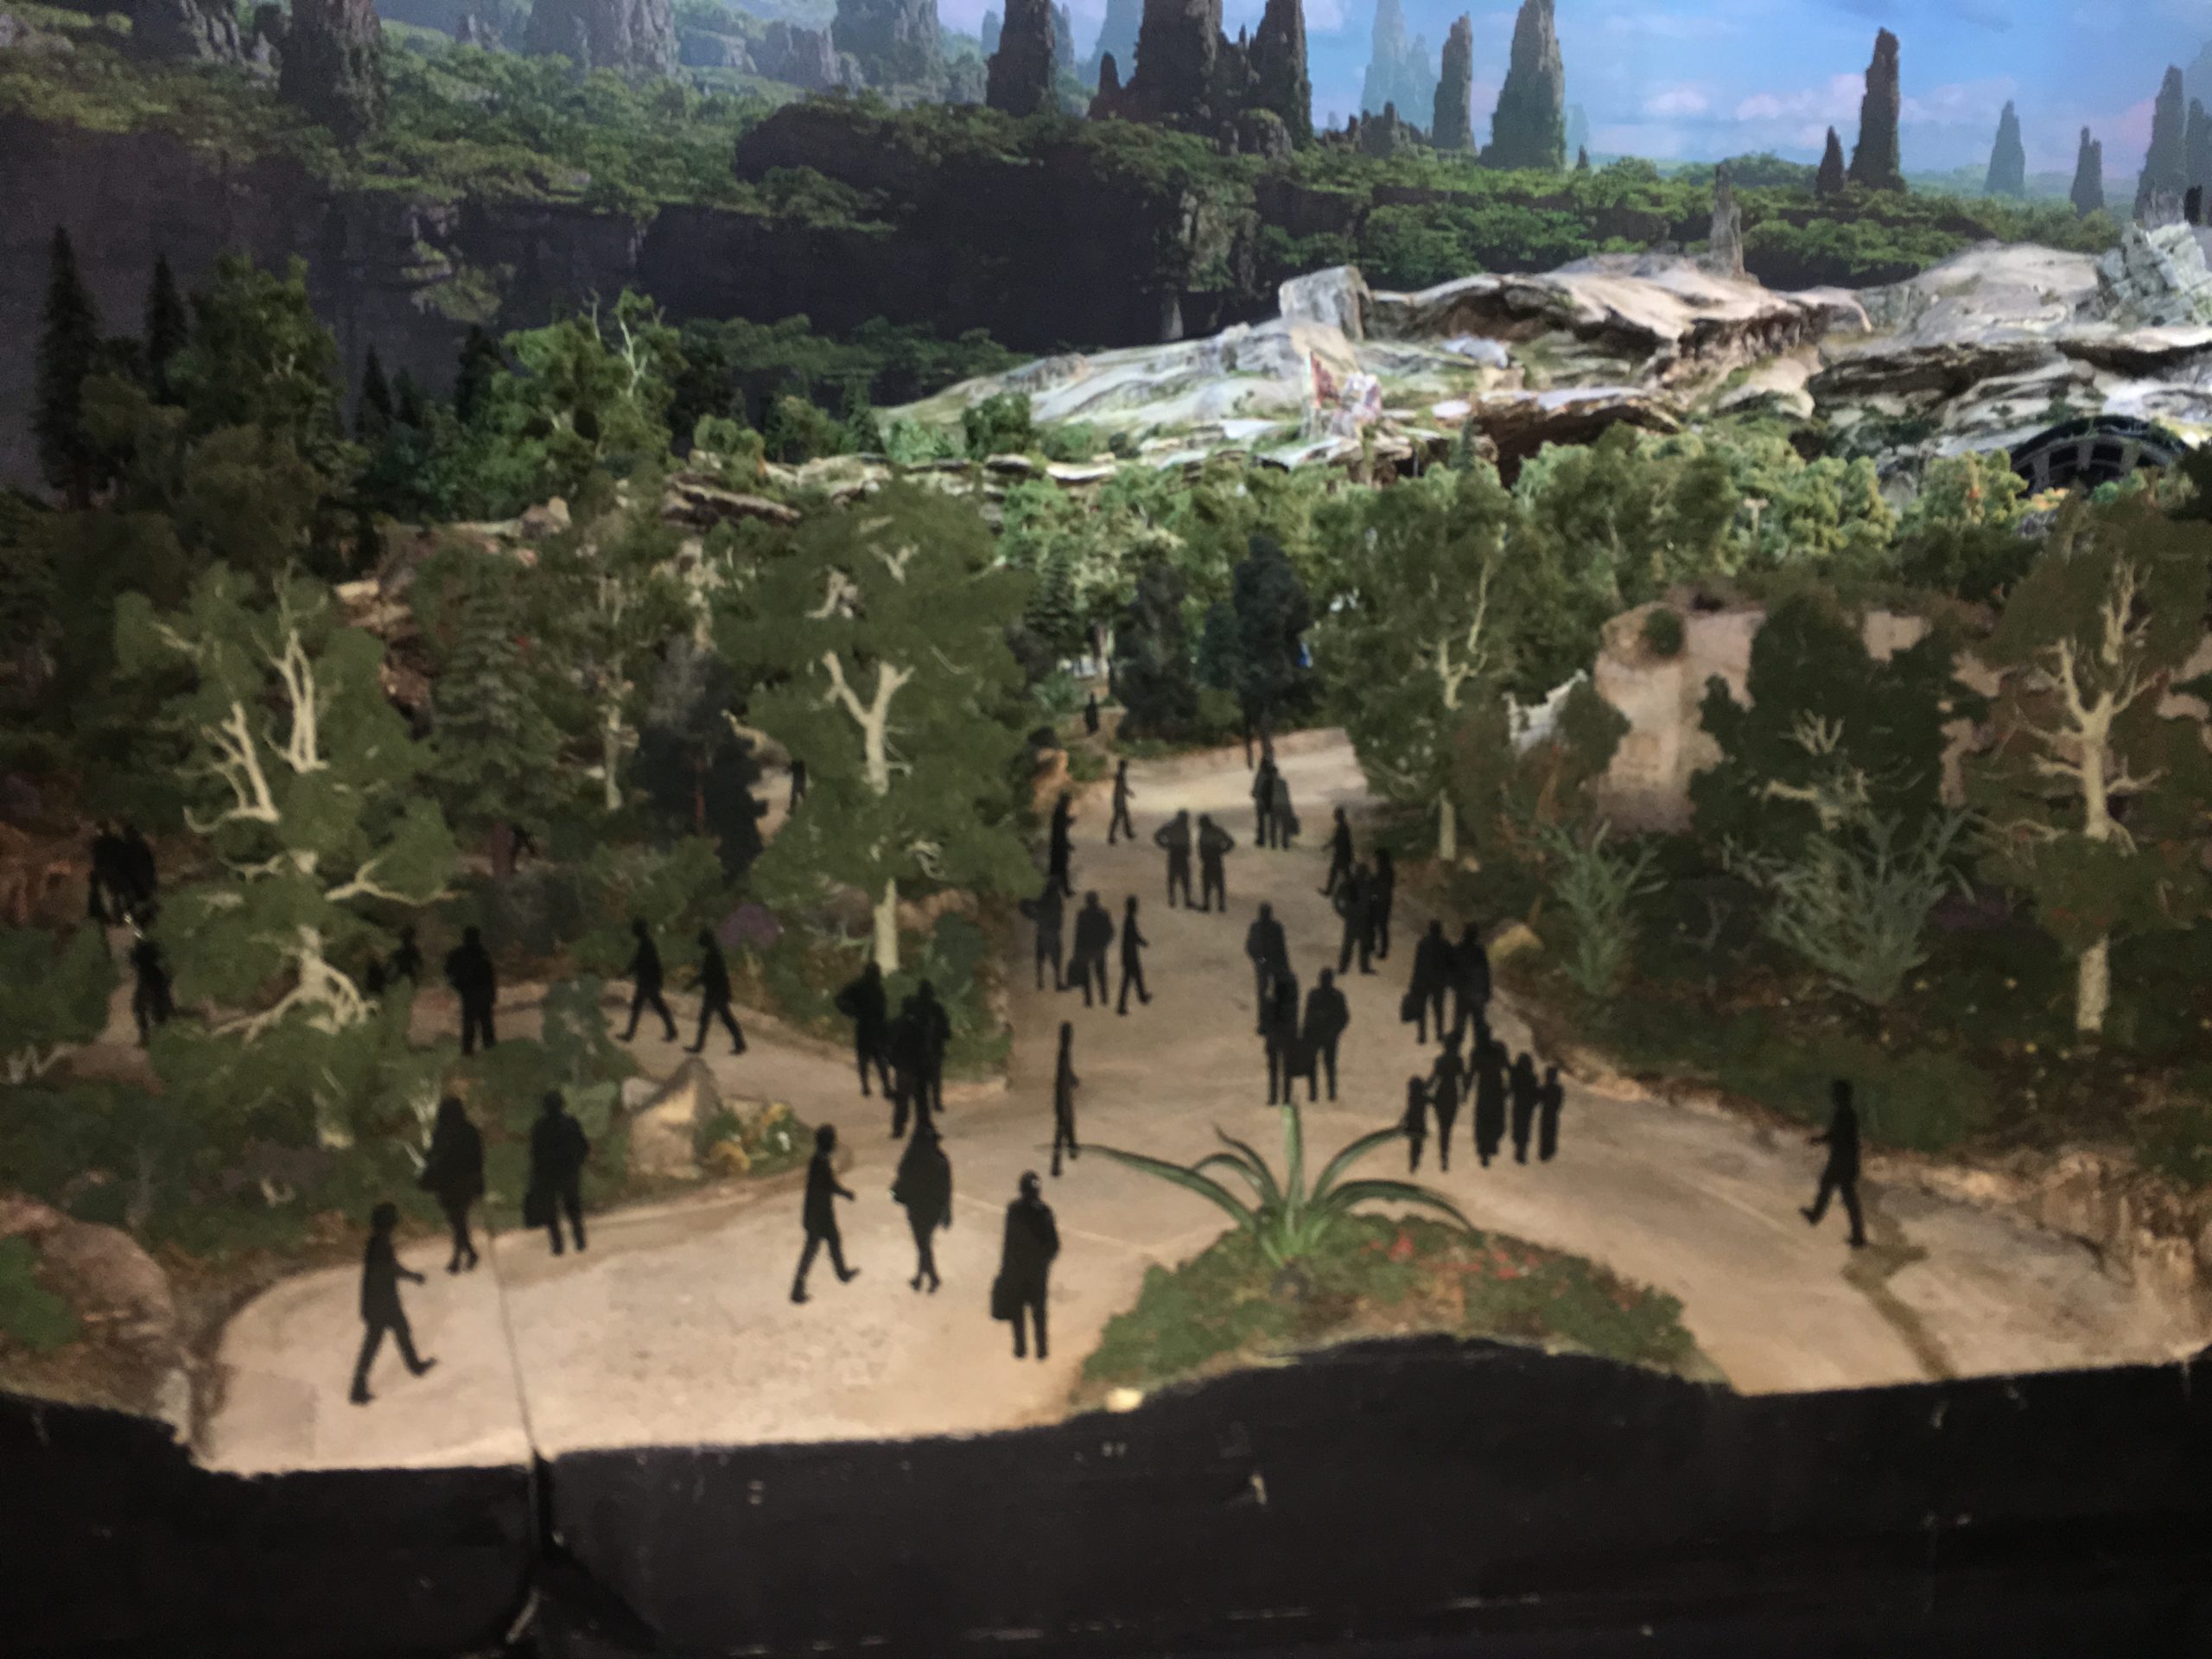 Here’s Your First Look At An Insanely Detailed Model Of Disney’s Star Wars Land (UPDATED)